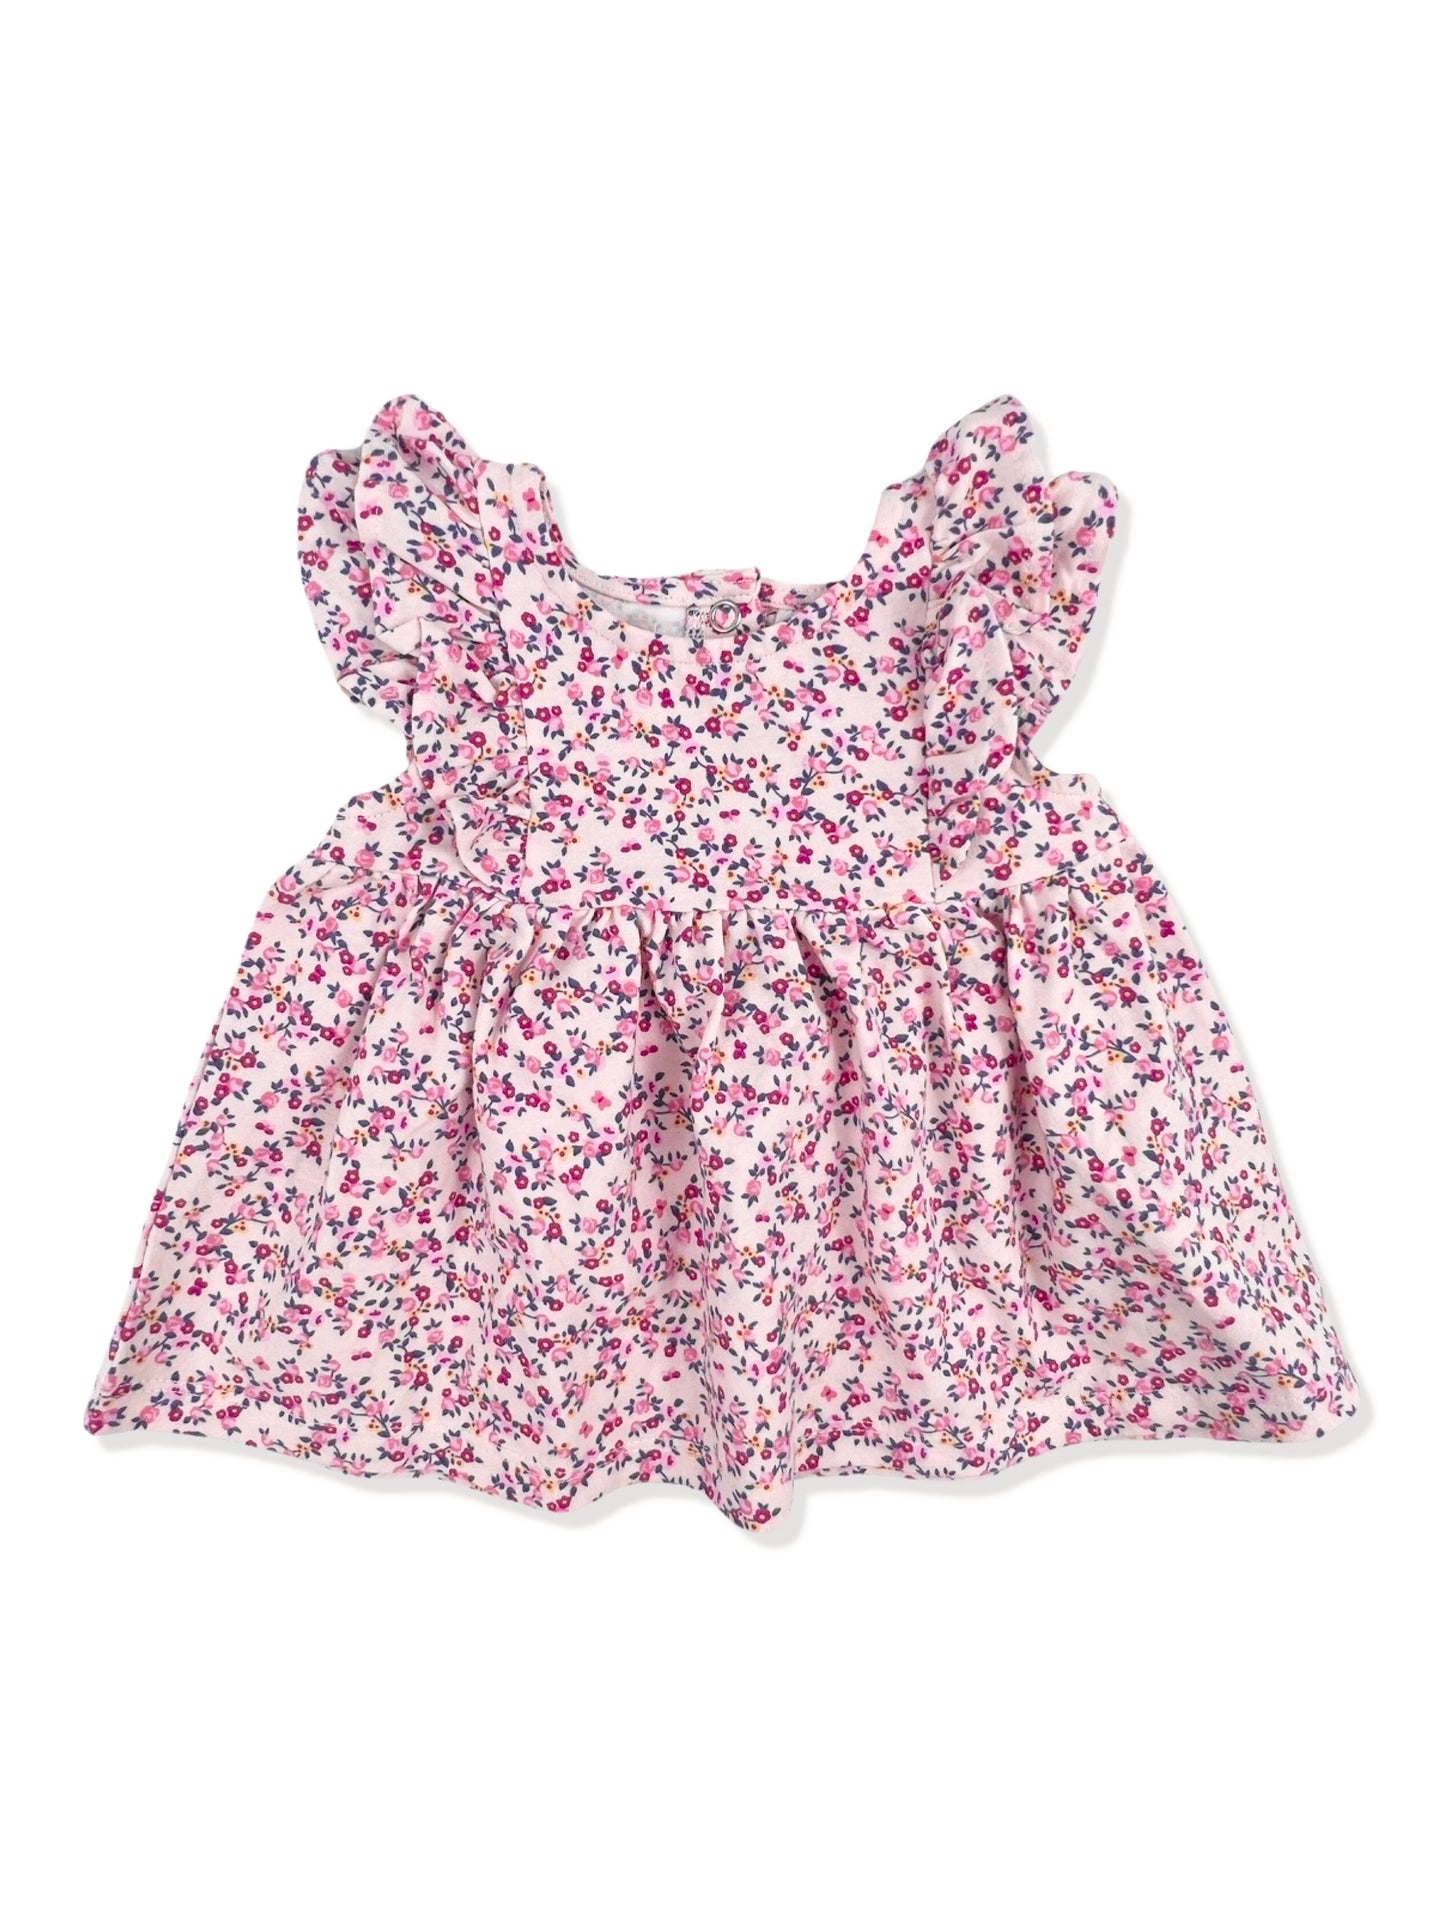 Cotton On Baby Pink Floral Dress - Size 000